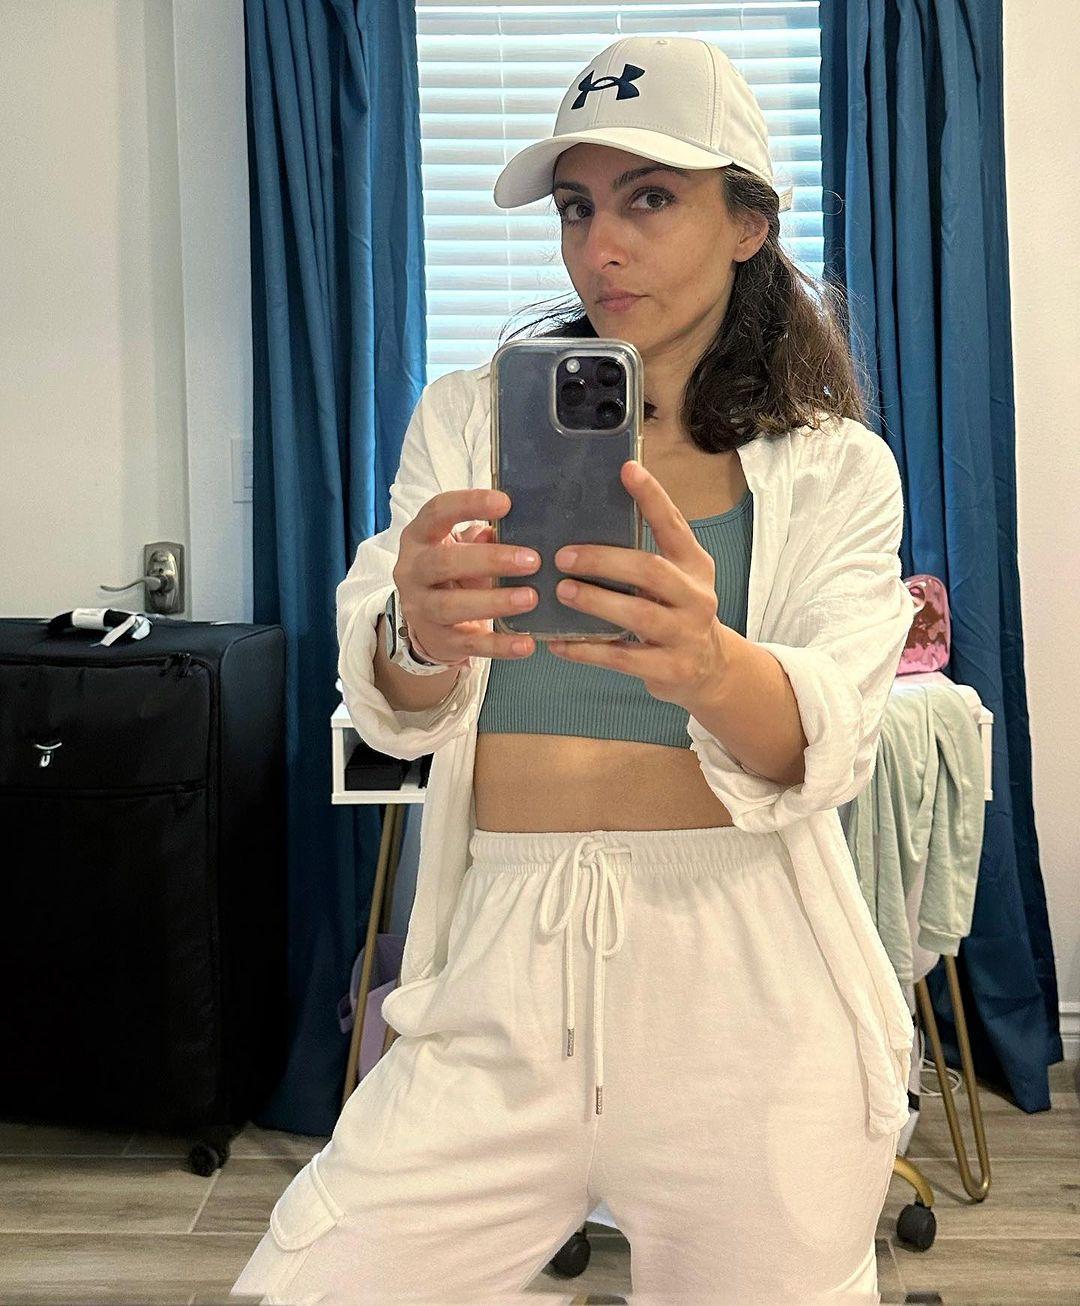 Mirror selfie! Soha Ali Khan looks ready to hit the road after a cool workout sesh